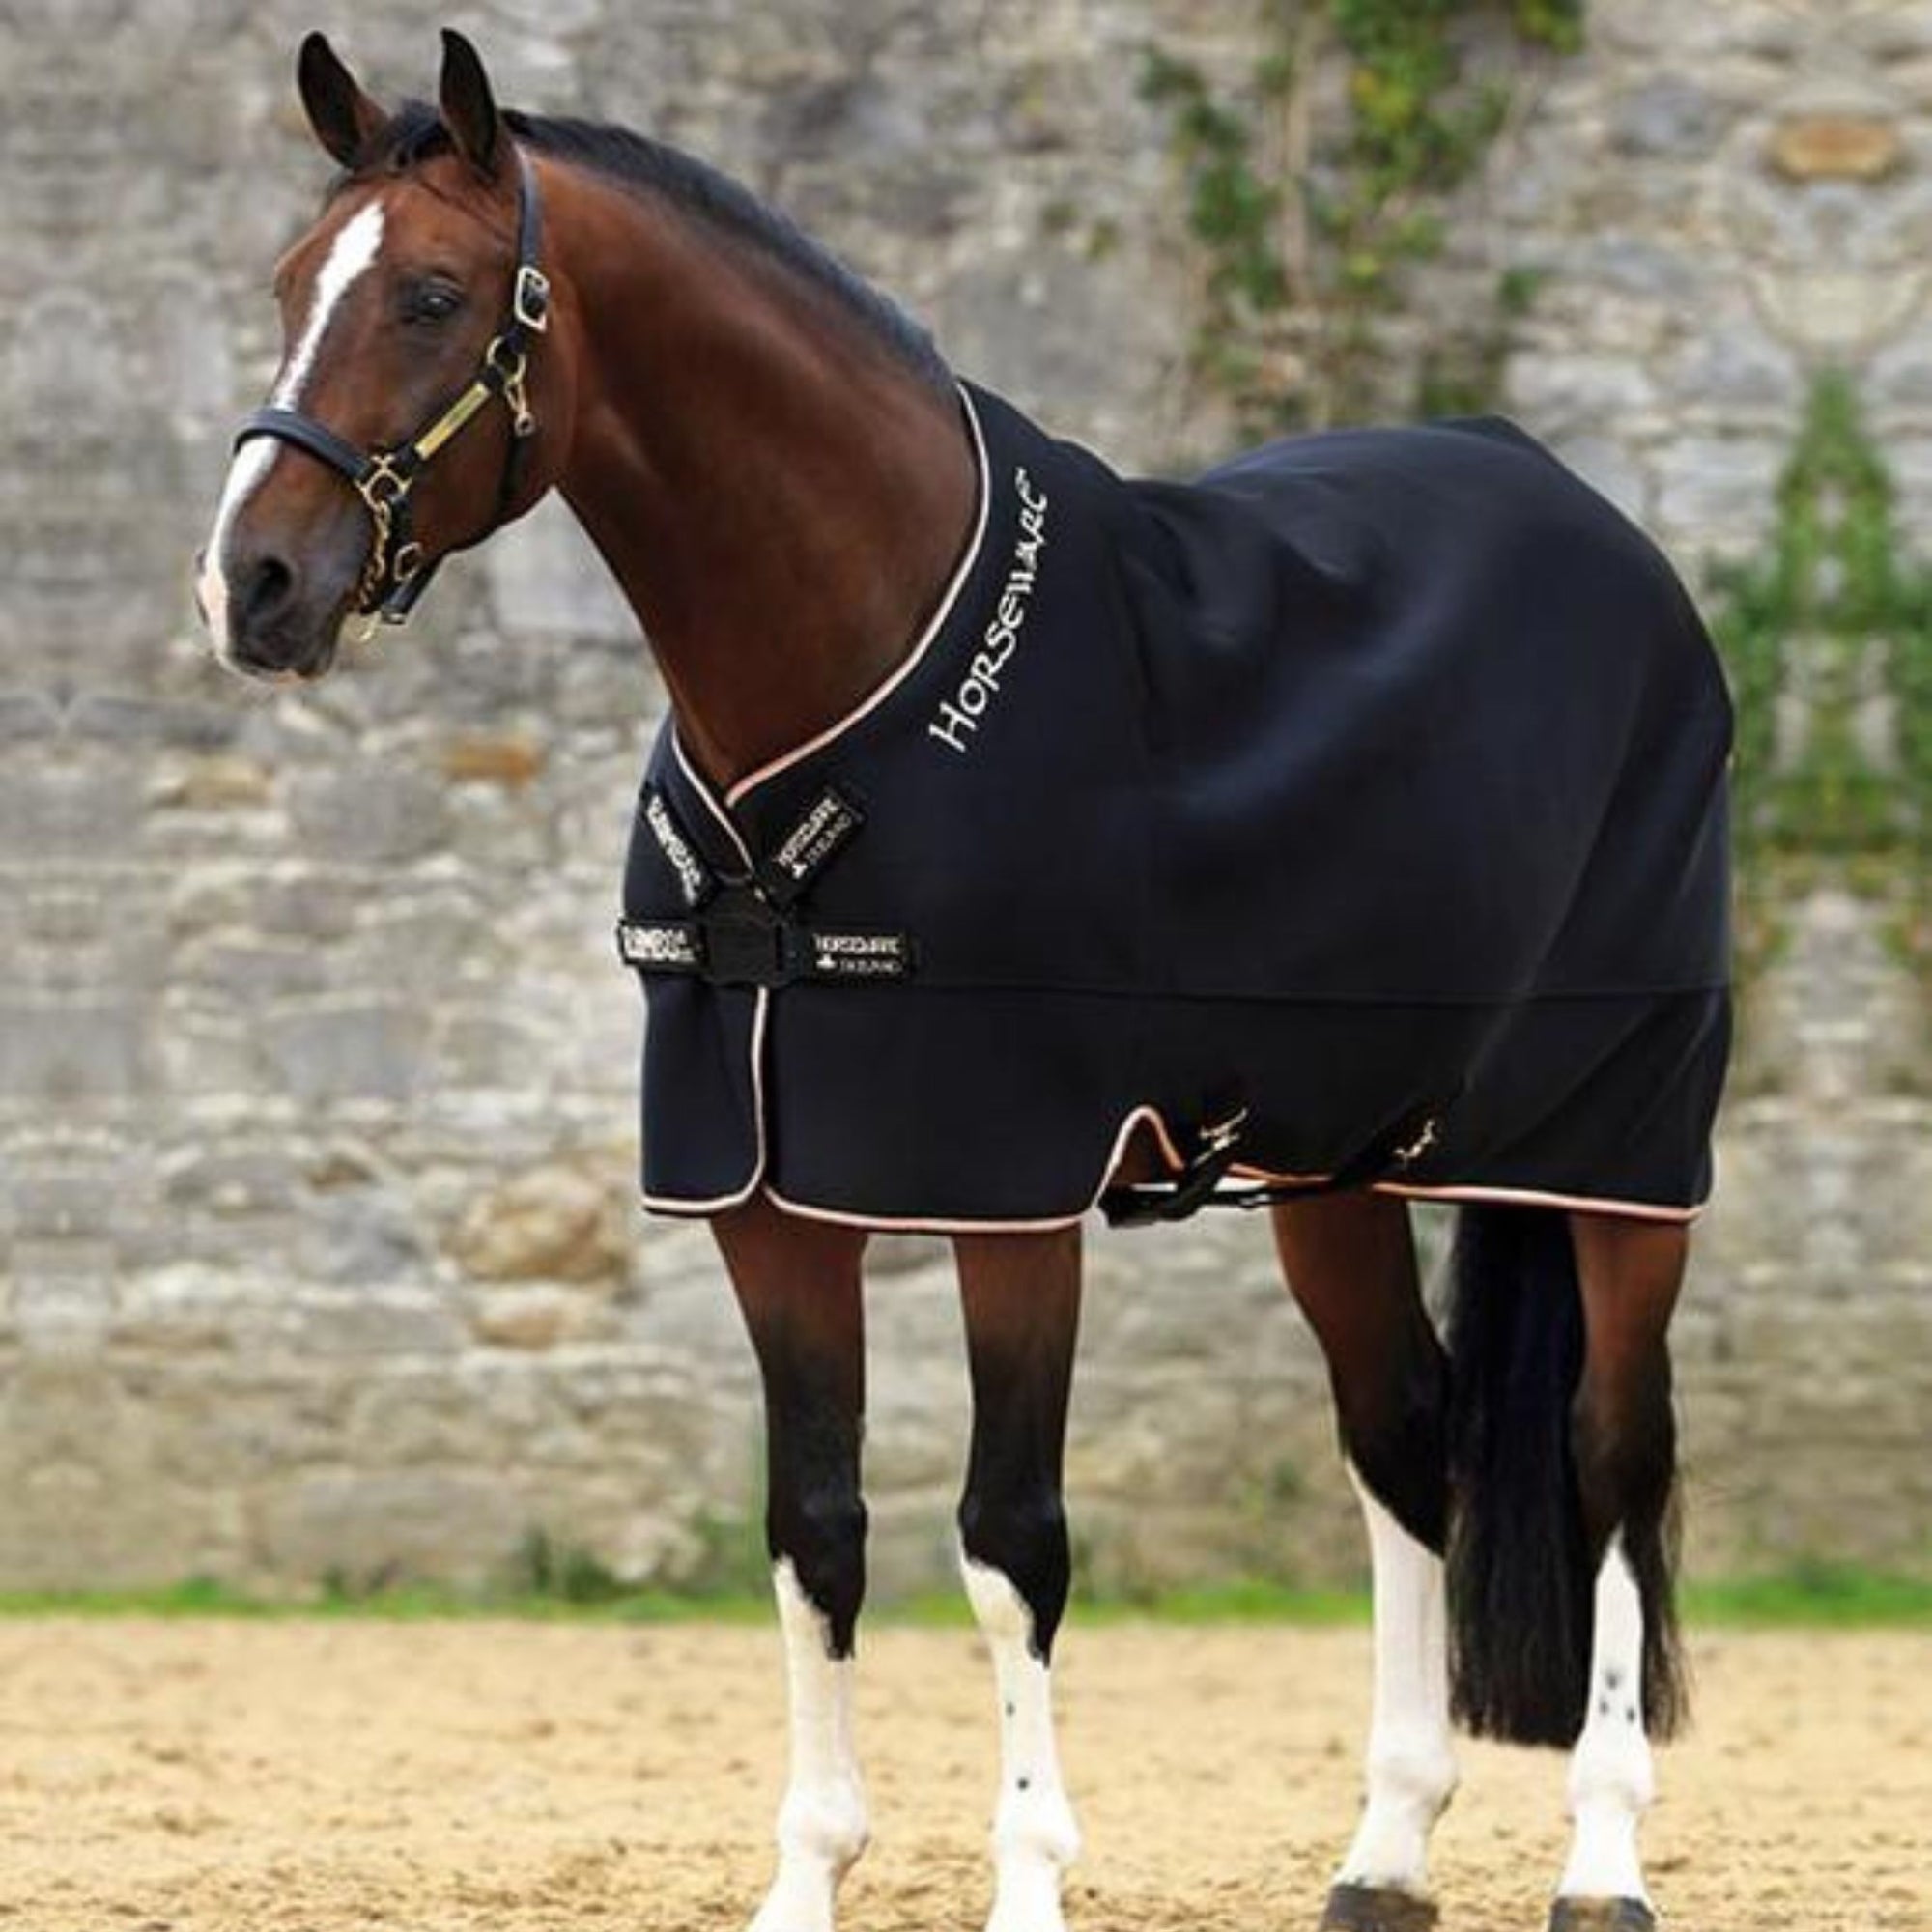 Black air max cooler rug with cream and red binding and Horseware logo on the neck line.